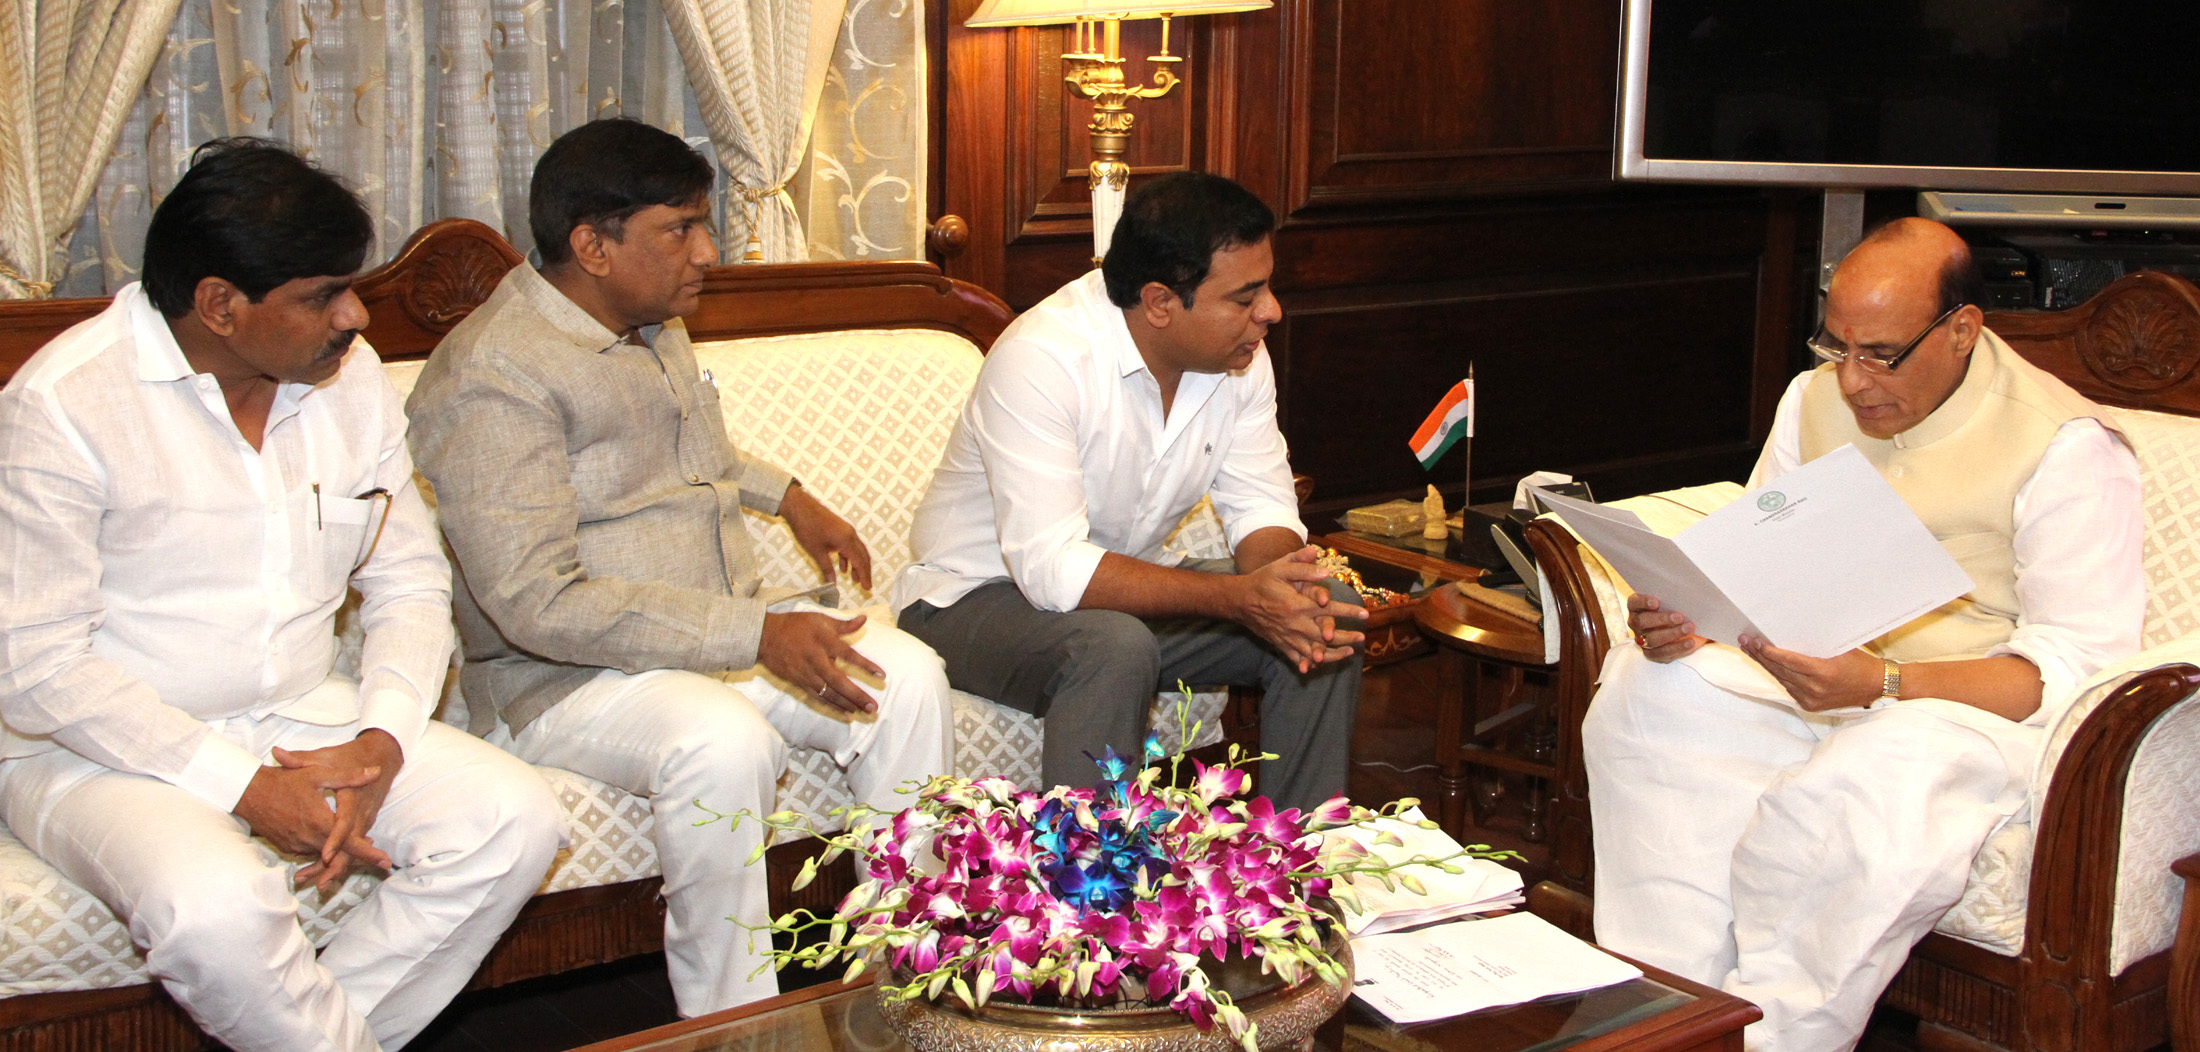 A delegation led by the Minister for Information Technology (IT), Panchayat Raj (PR) and Municipal Administration and Urban Development (MAUD), Telangana, Shri K.T. Rama Rao calling on the Union Home Minister, Shri Rajnath Singh, in New Delhi on March 29, 2016